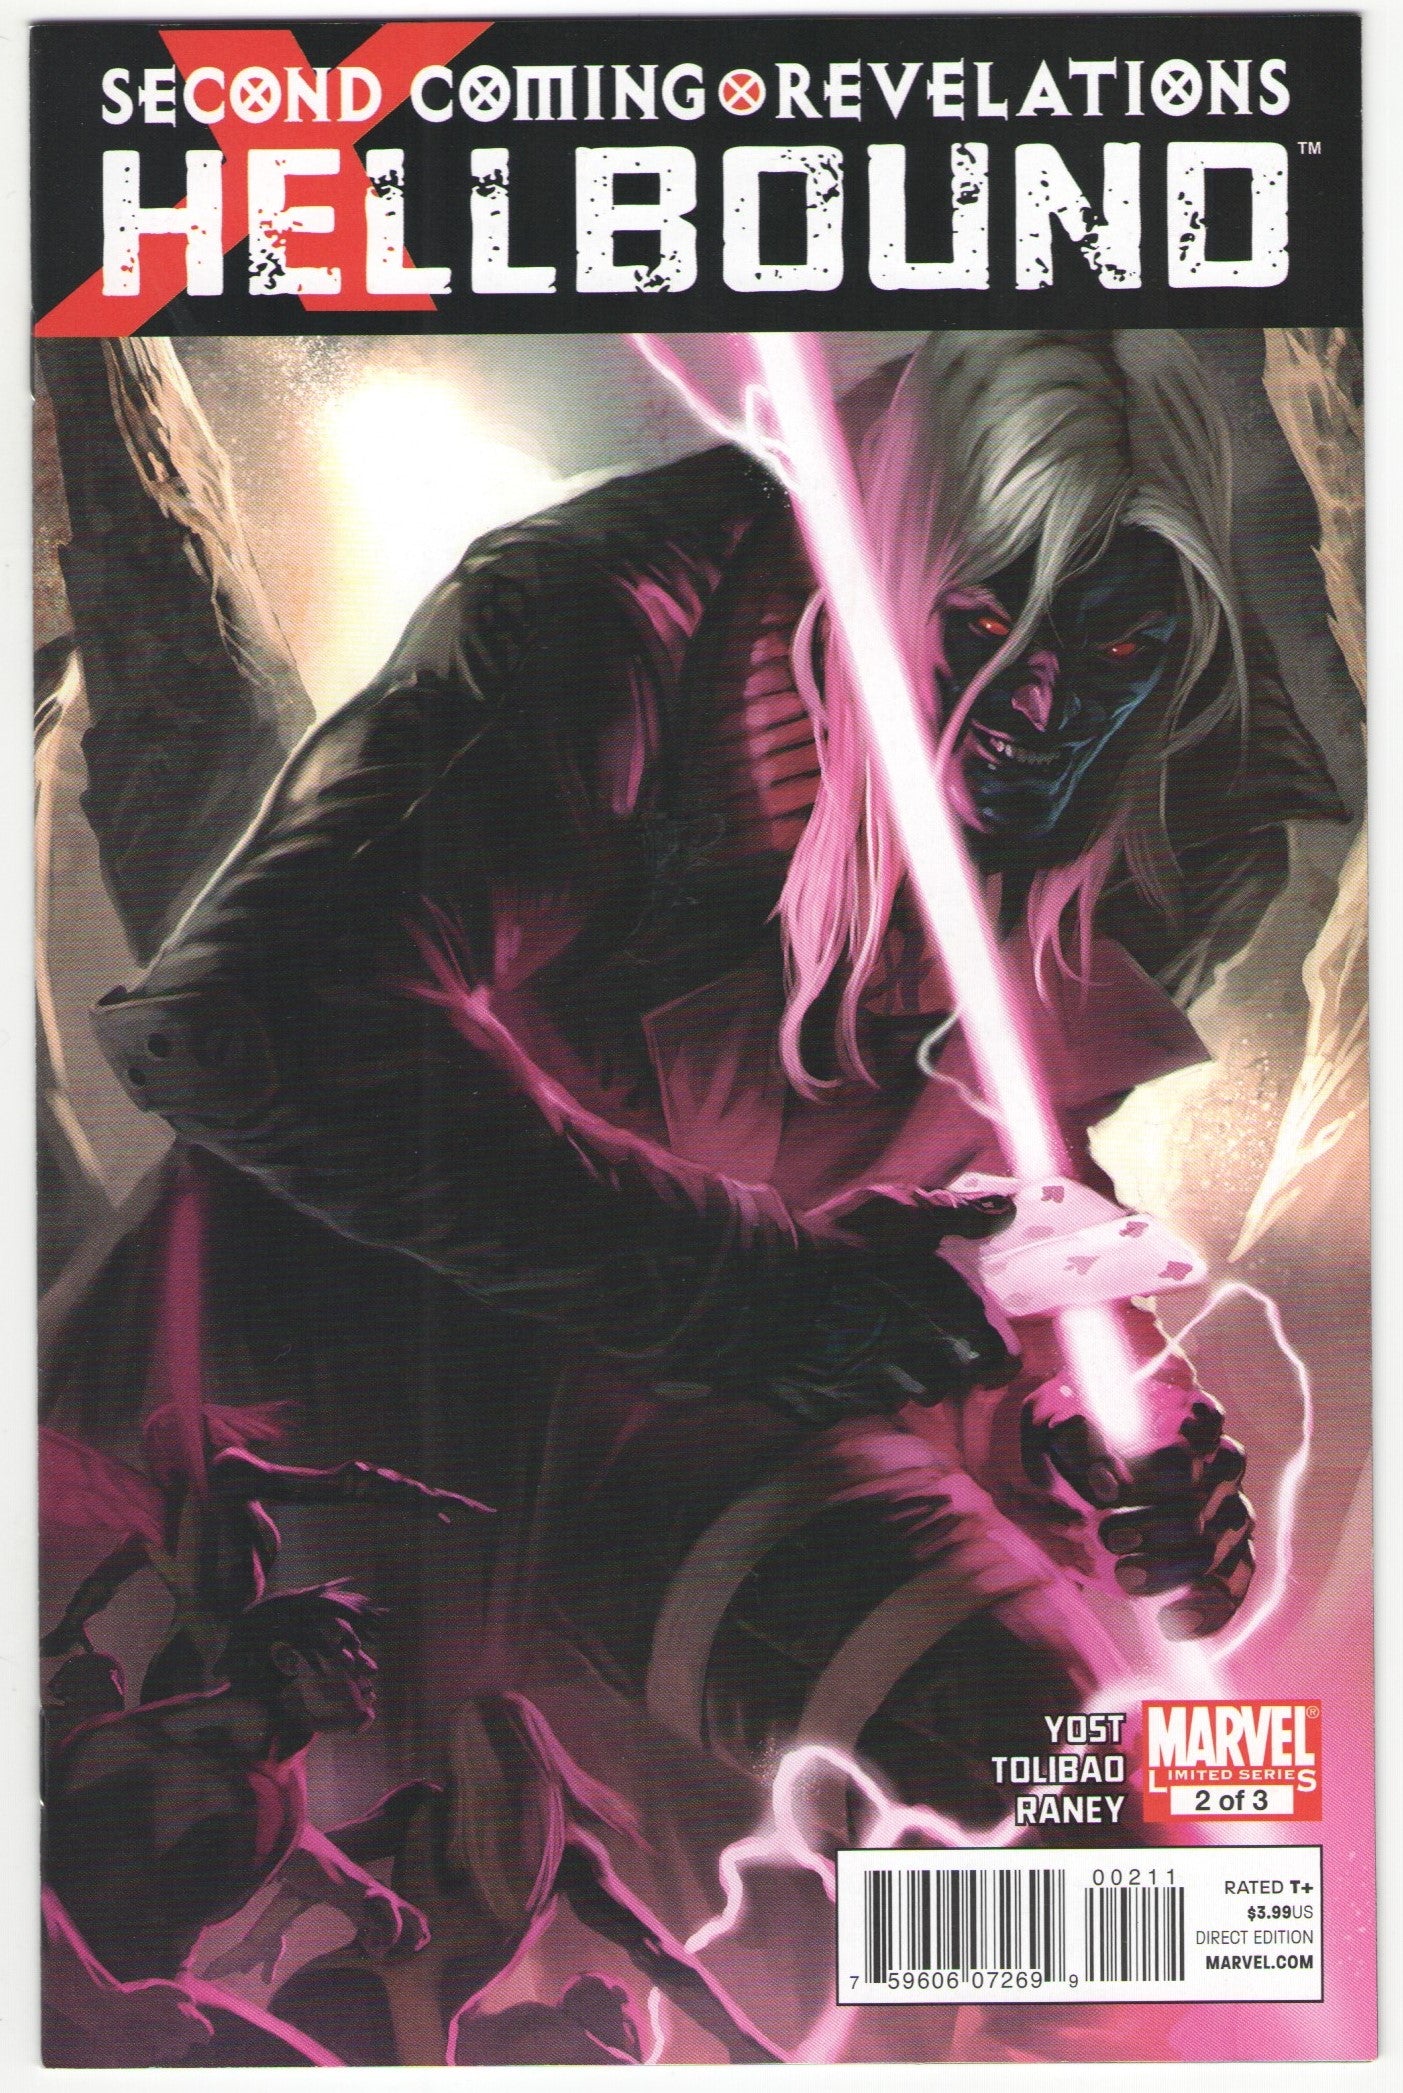 X-Men Second Coming - Revelations Limited Series/One-Shot (2010)